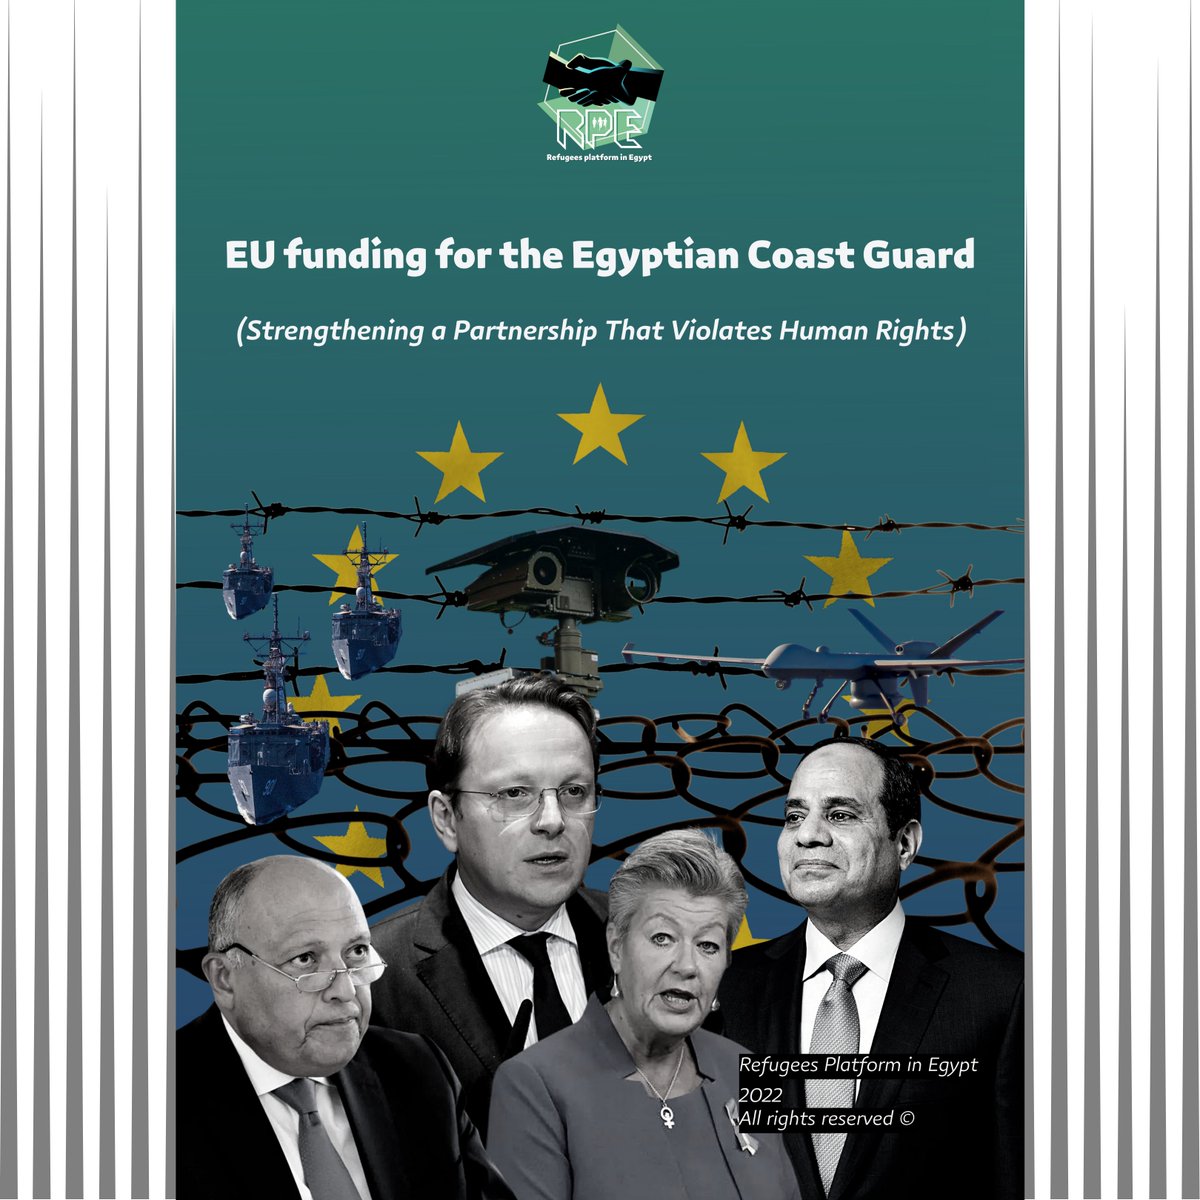 1- A new paper on the European Union’s decision, last June, to fund the Egyptian Coast Guard with 80 million euros, an amount that will be paid in two phases with the aim of “purchasing maritime border control equipment”, but there are no details about what the equipment is